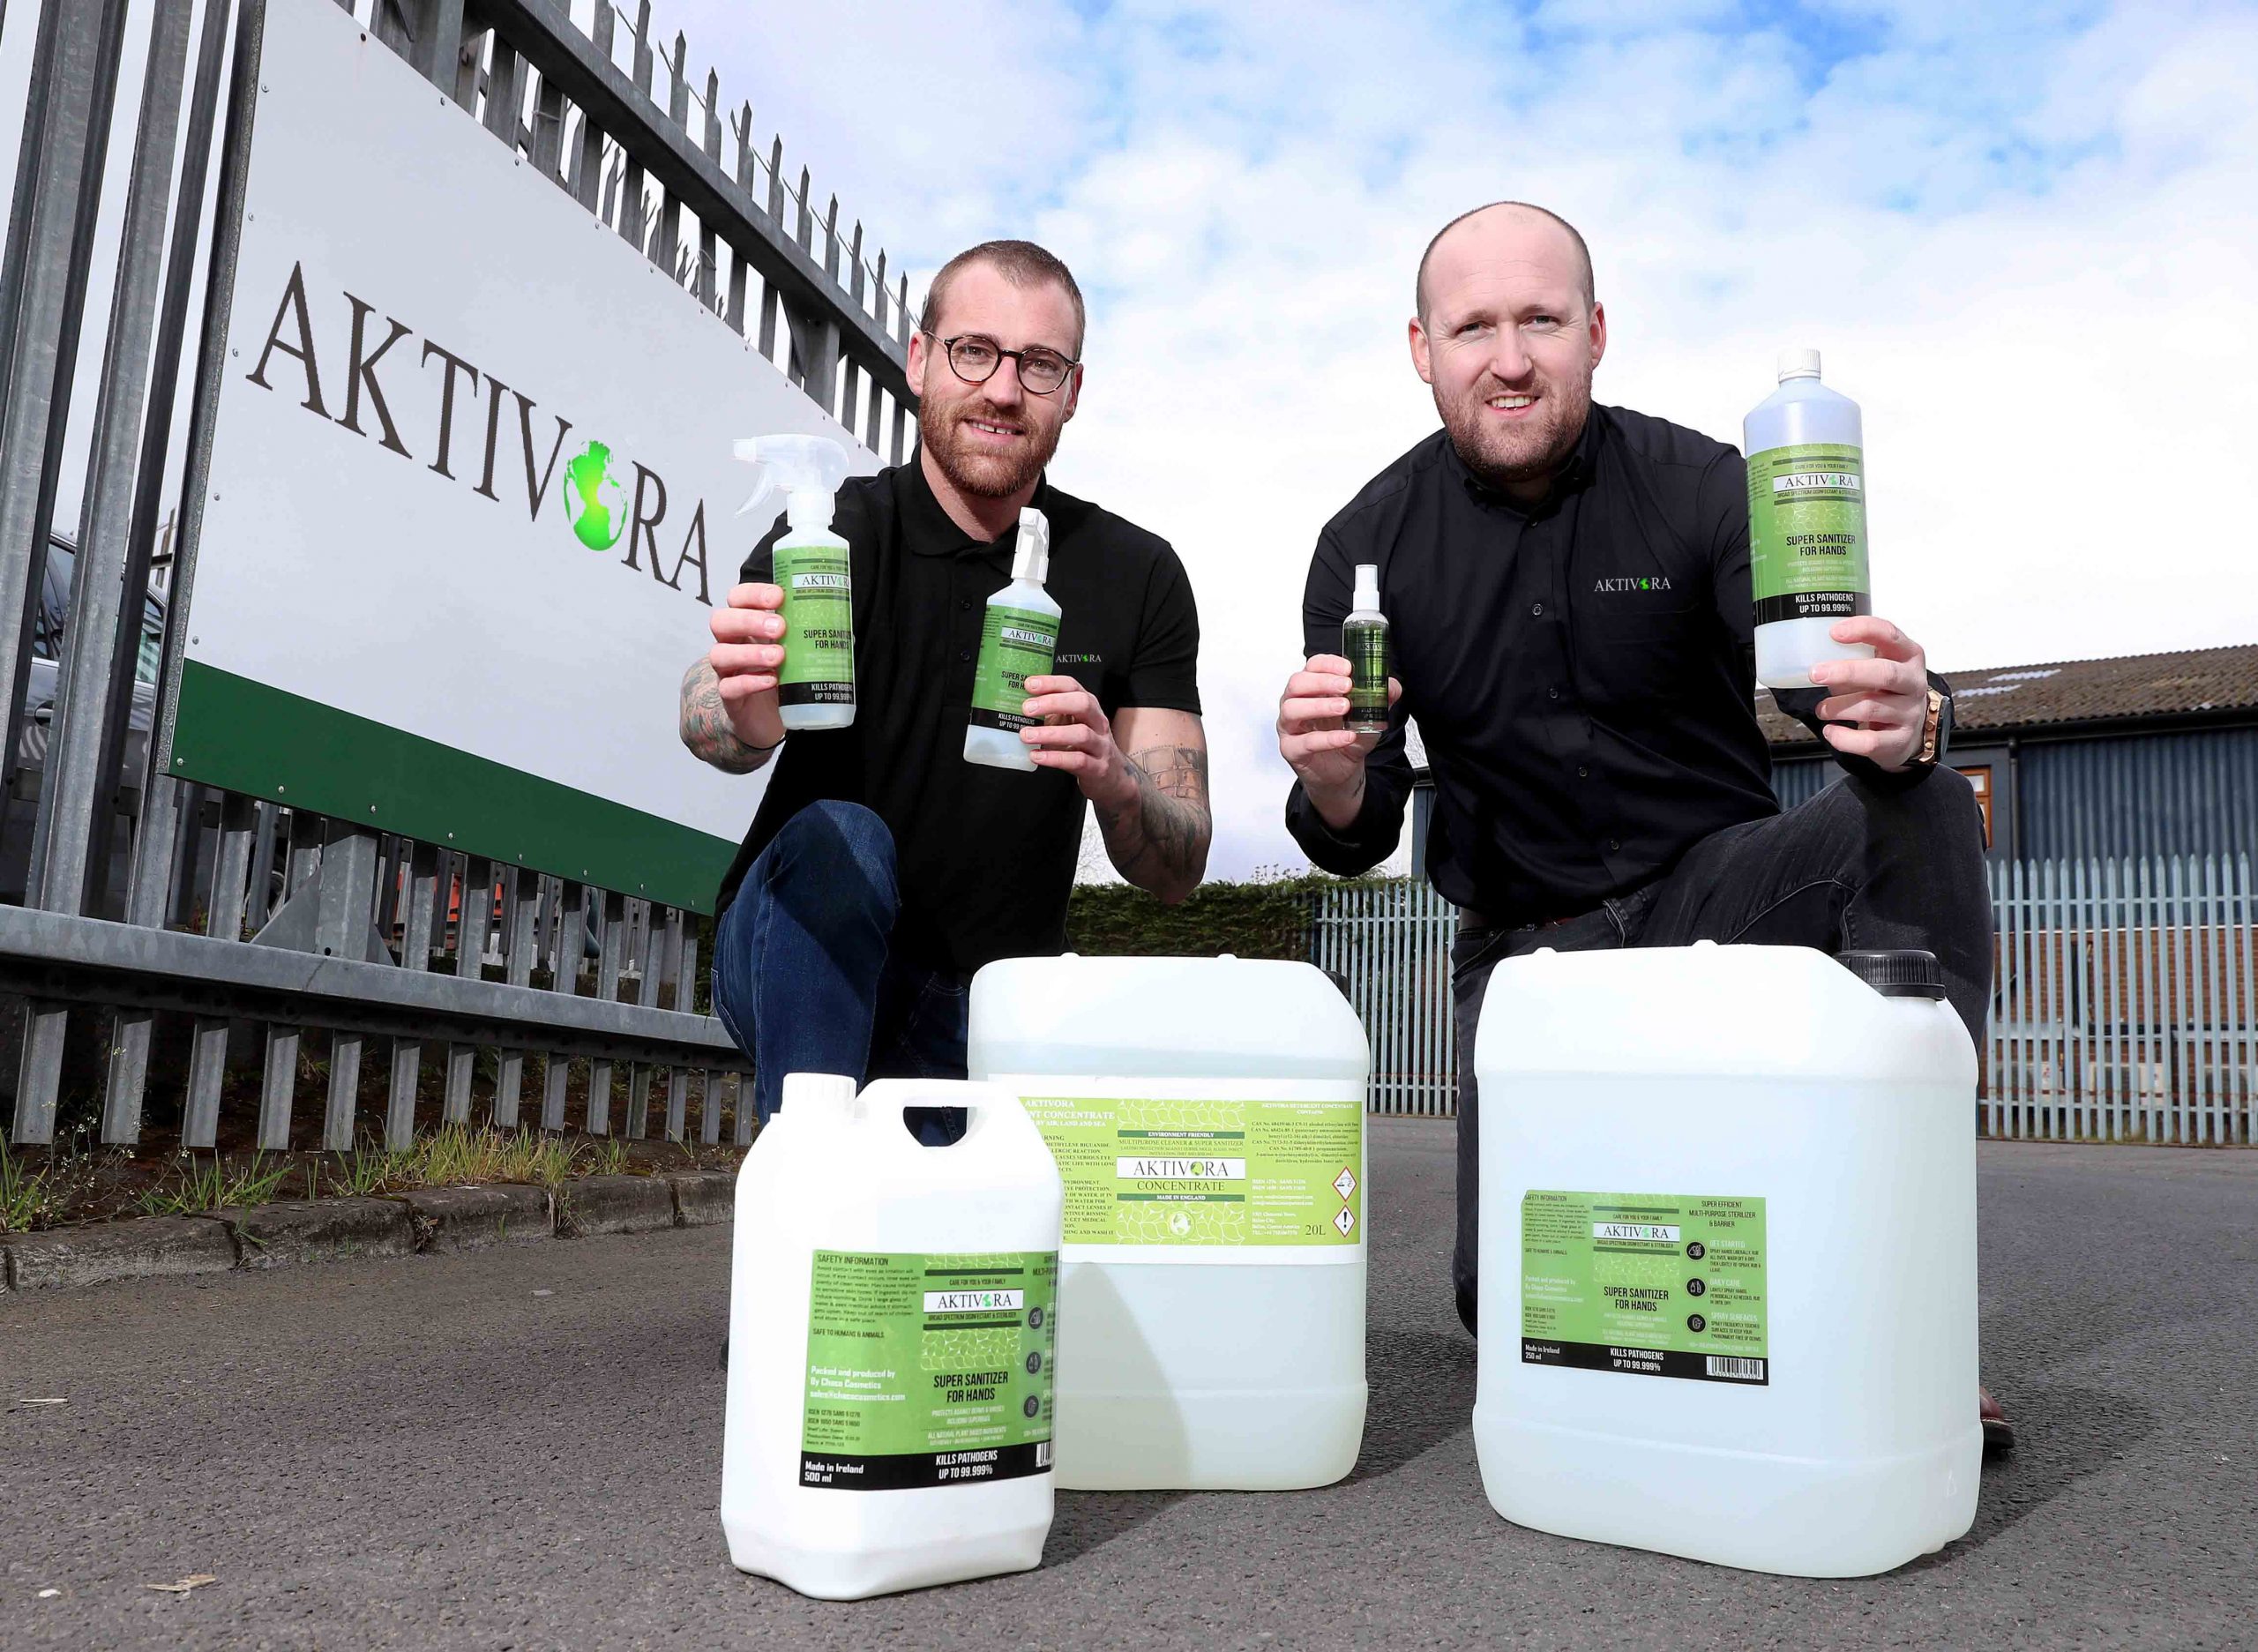 NI company Aktivora inundated with orders for new ‘Super Sanitiser’